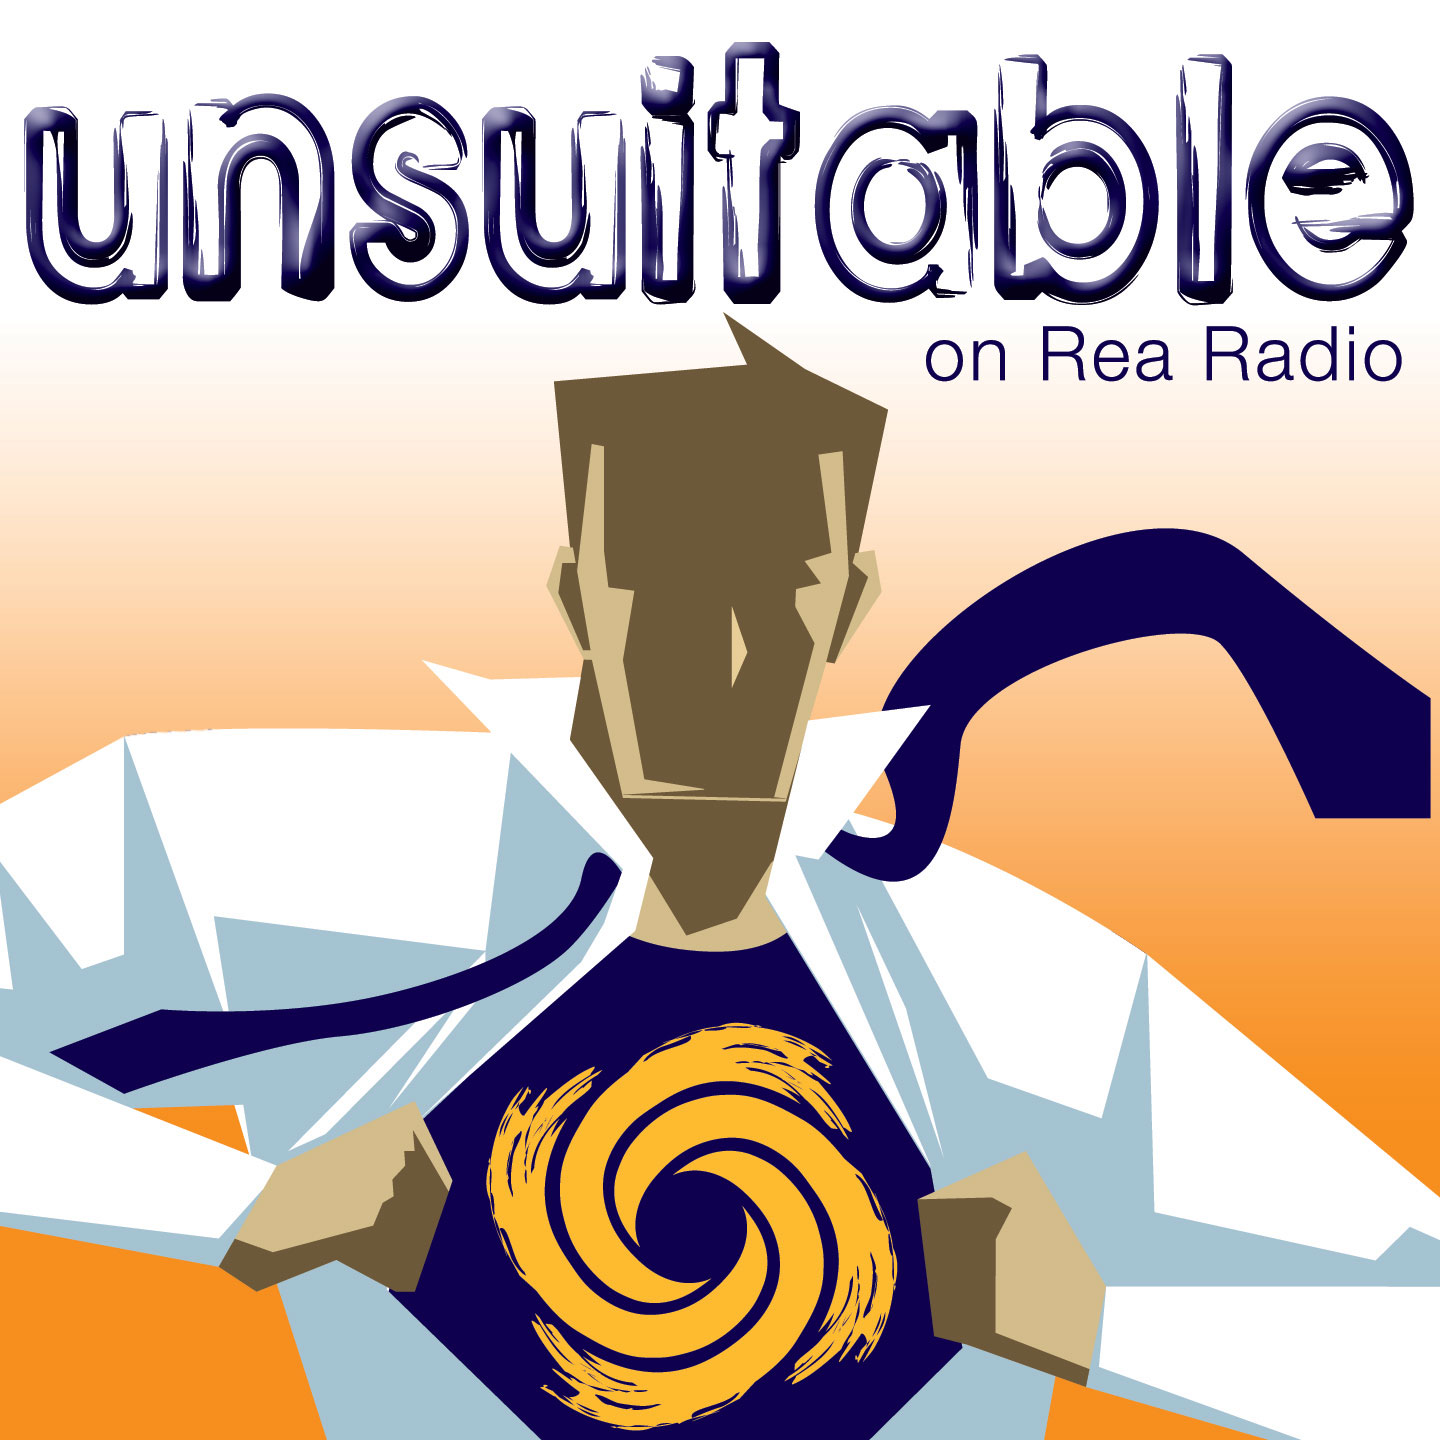 Artwork for podcast unsuitable on Rea Radio